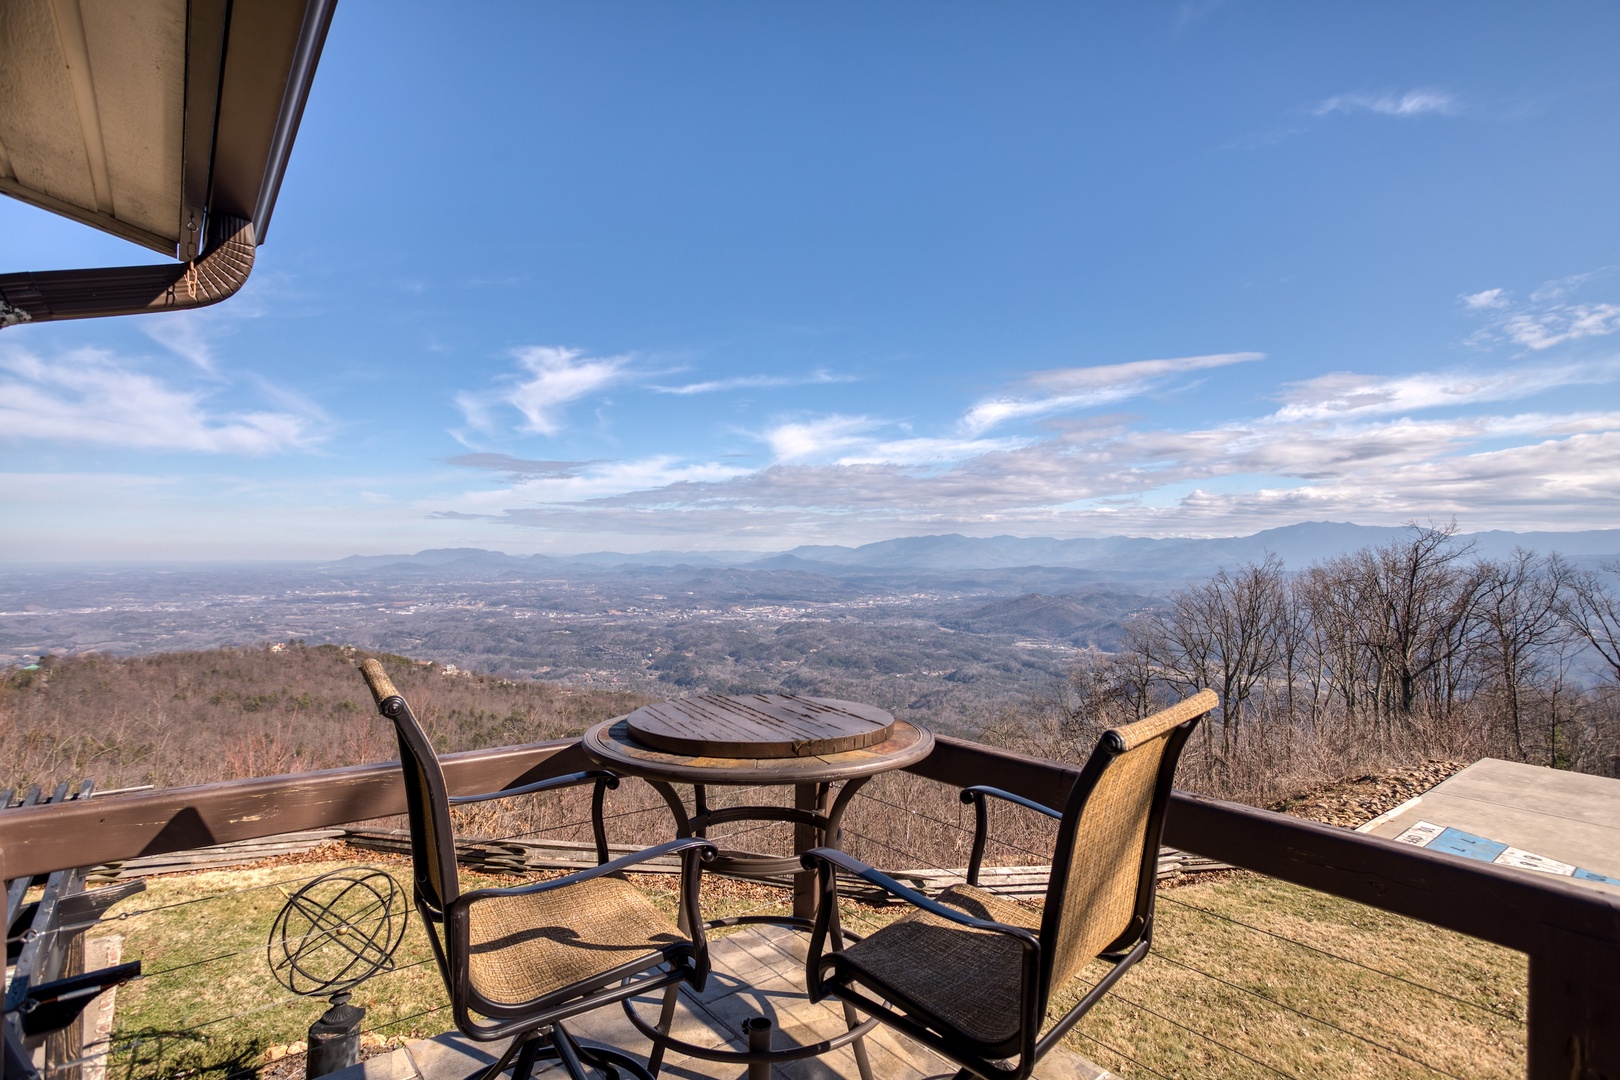 Deck dining overlooking the view at Best View Ever! A 5 bedroom cabin rental in Pigeon Forge